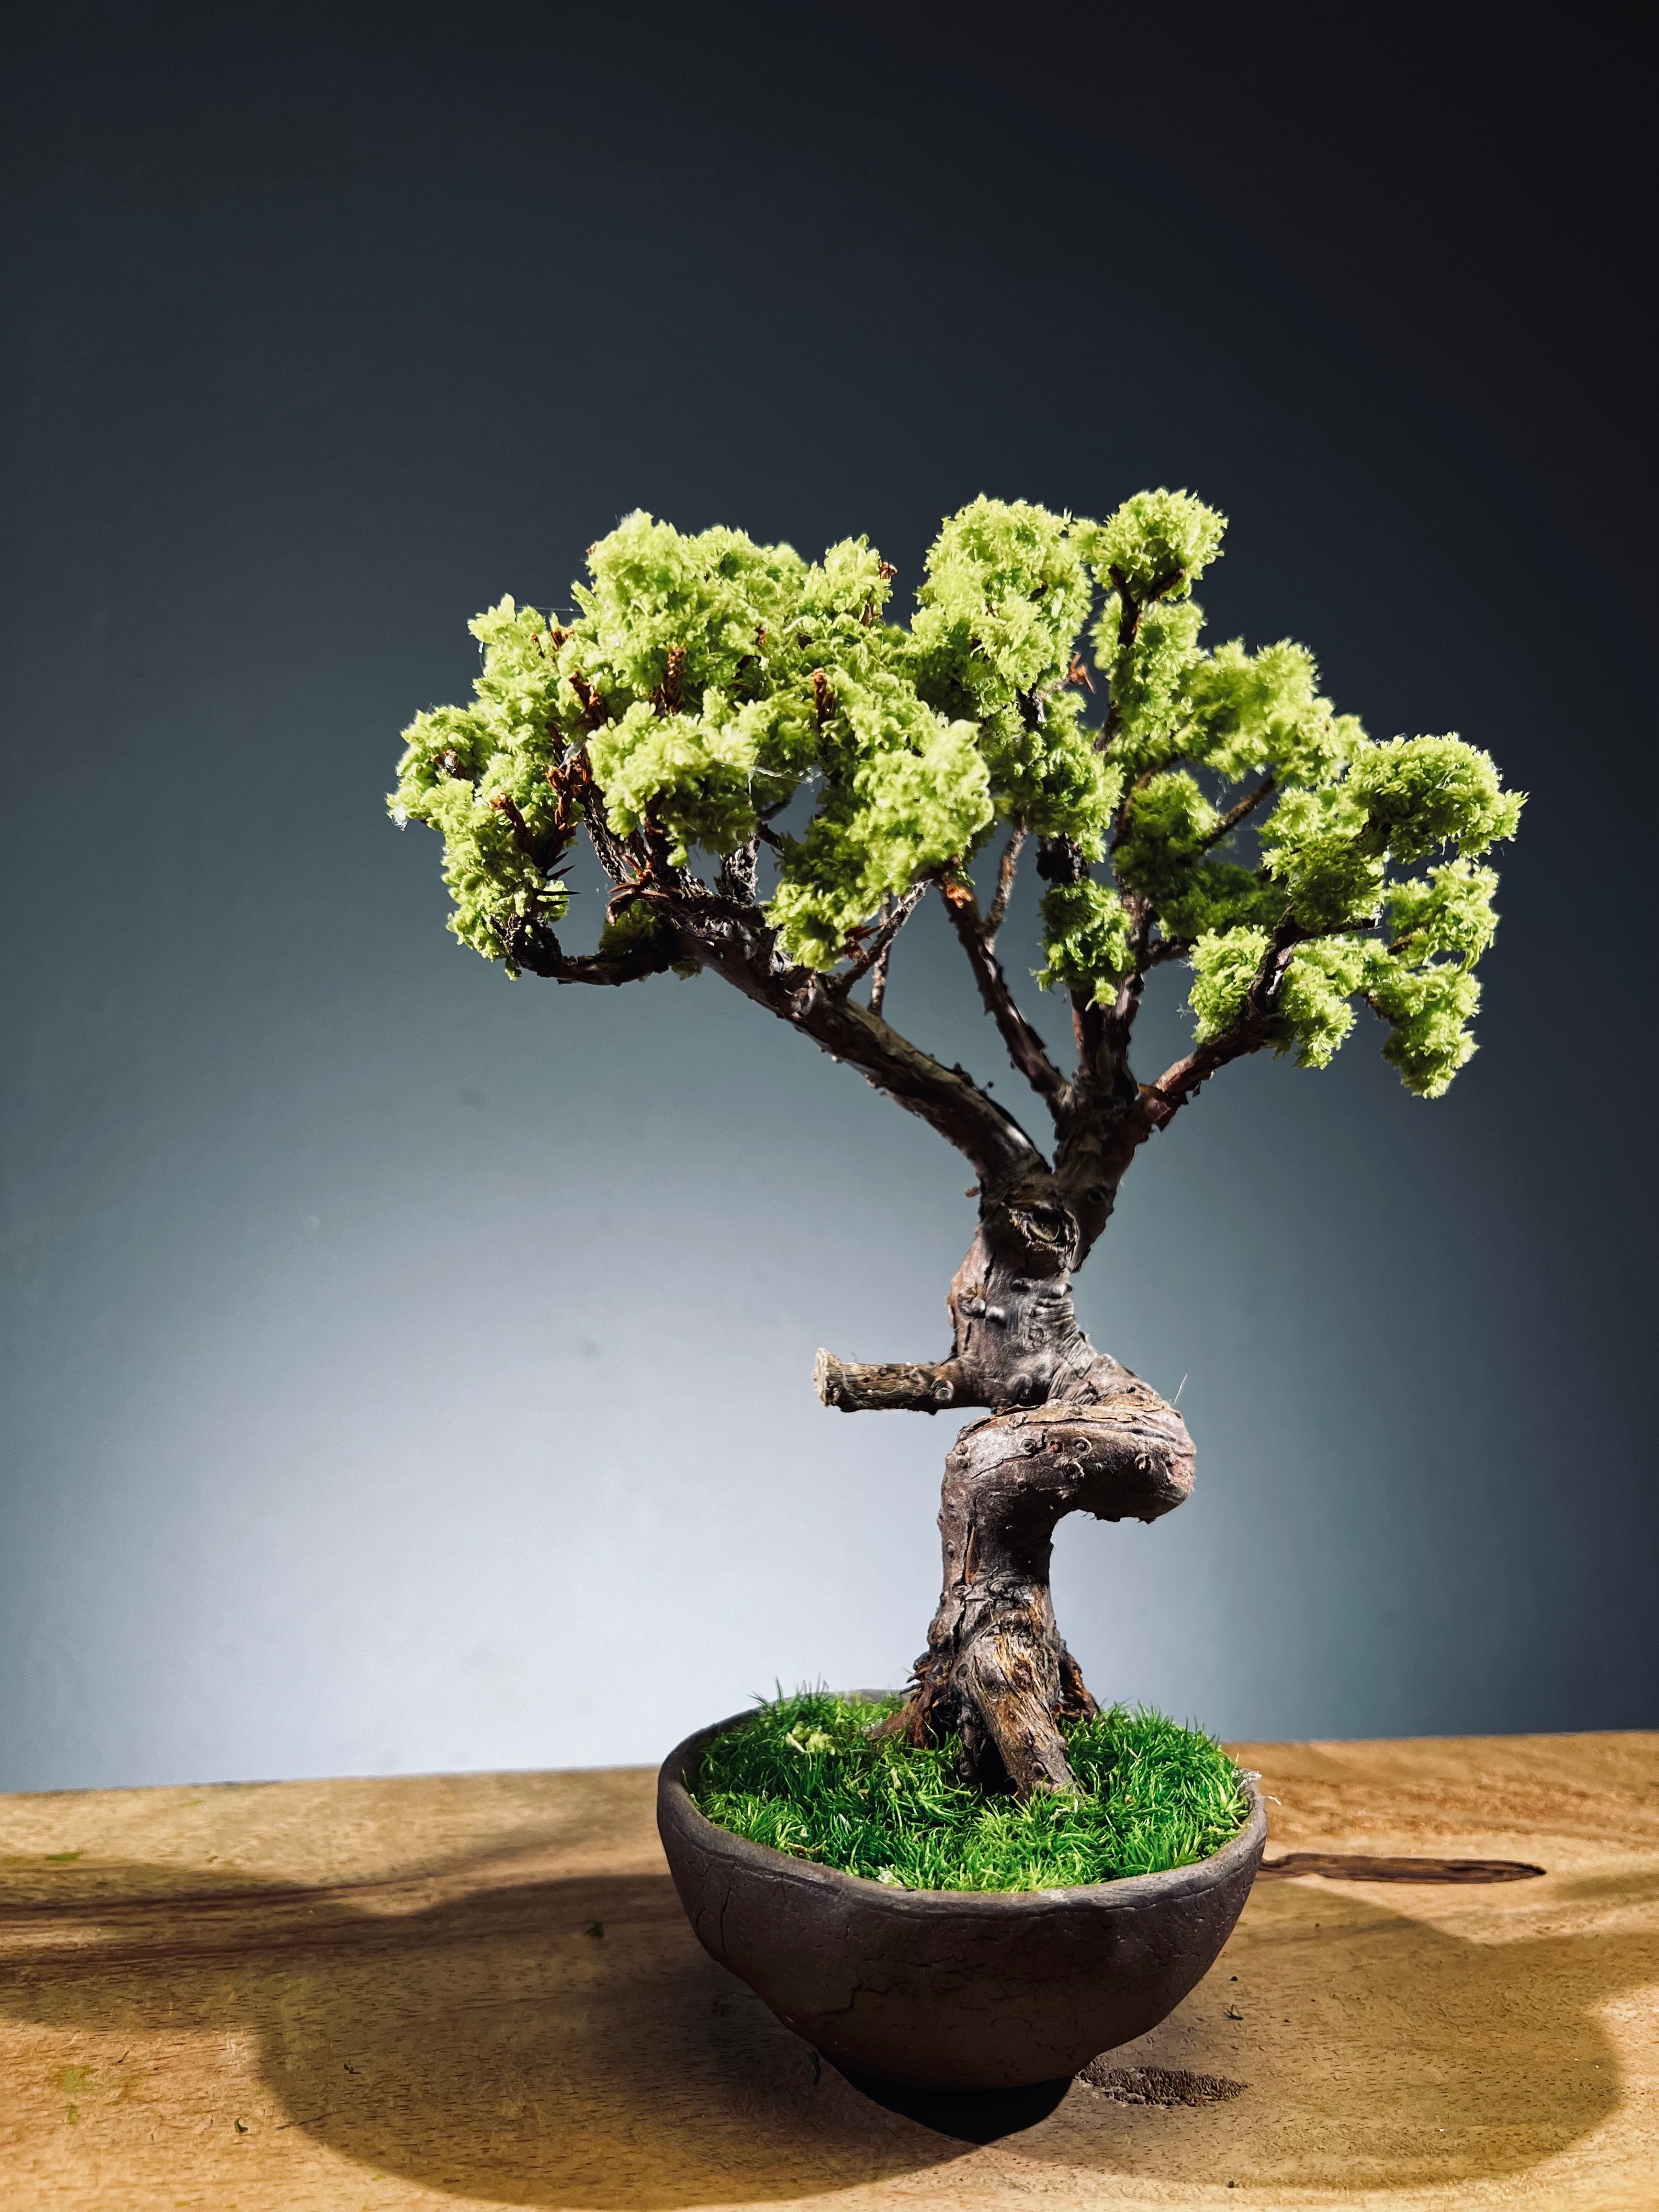 Juniper by the Winding Path - Teen (Preserved Plants)